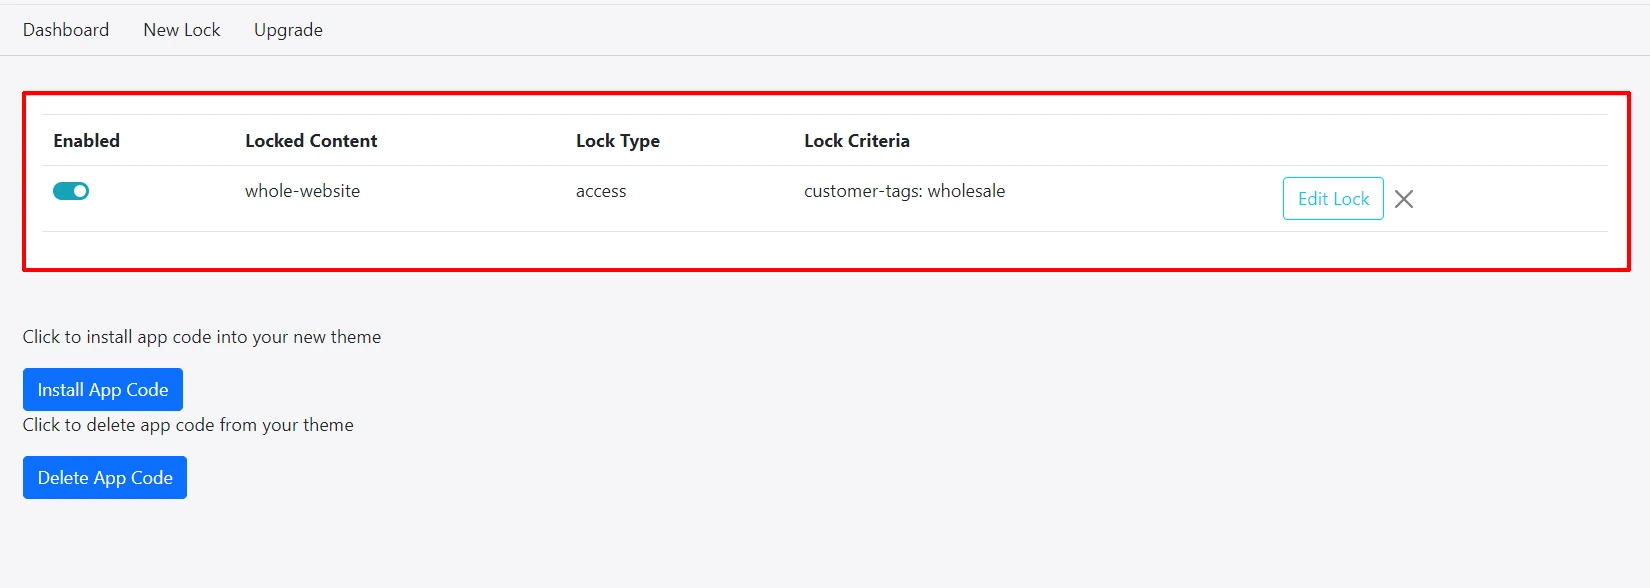 content restriction in Shopify - disable, edit, delete lock